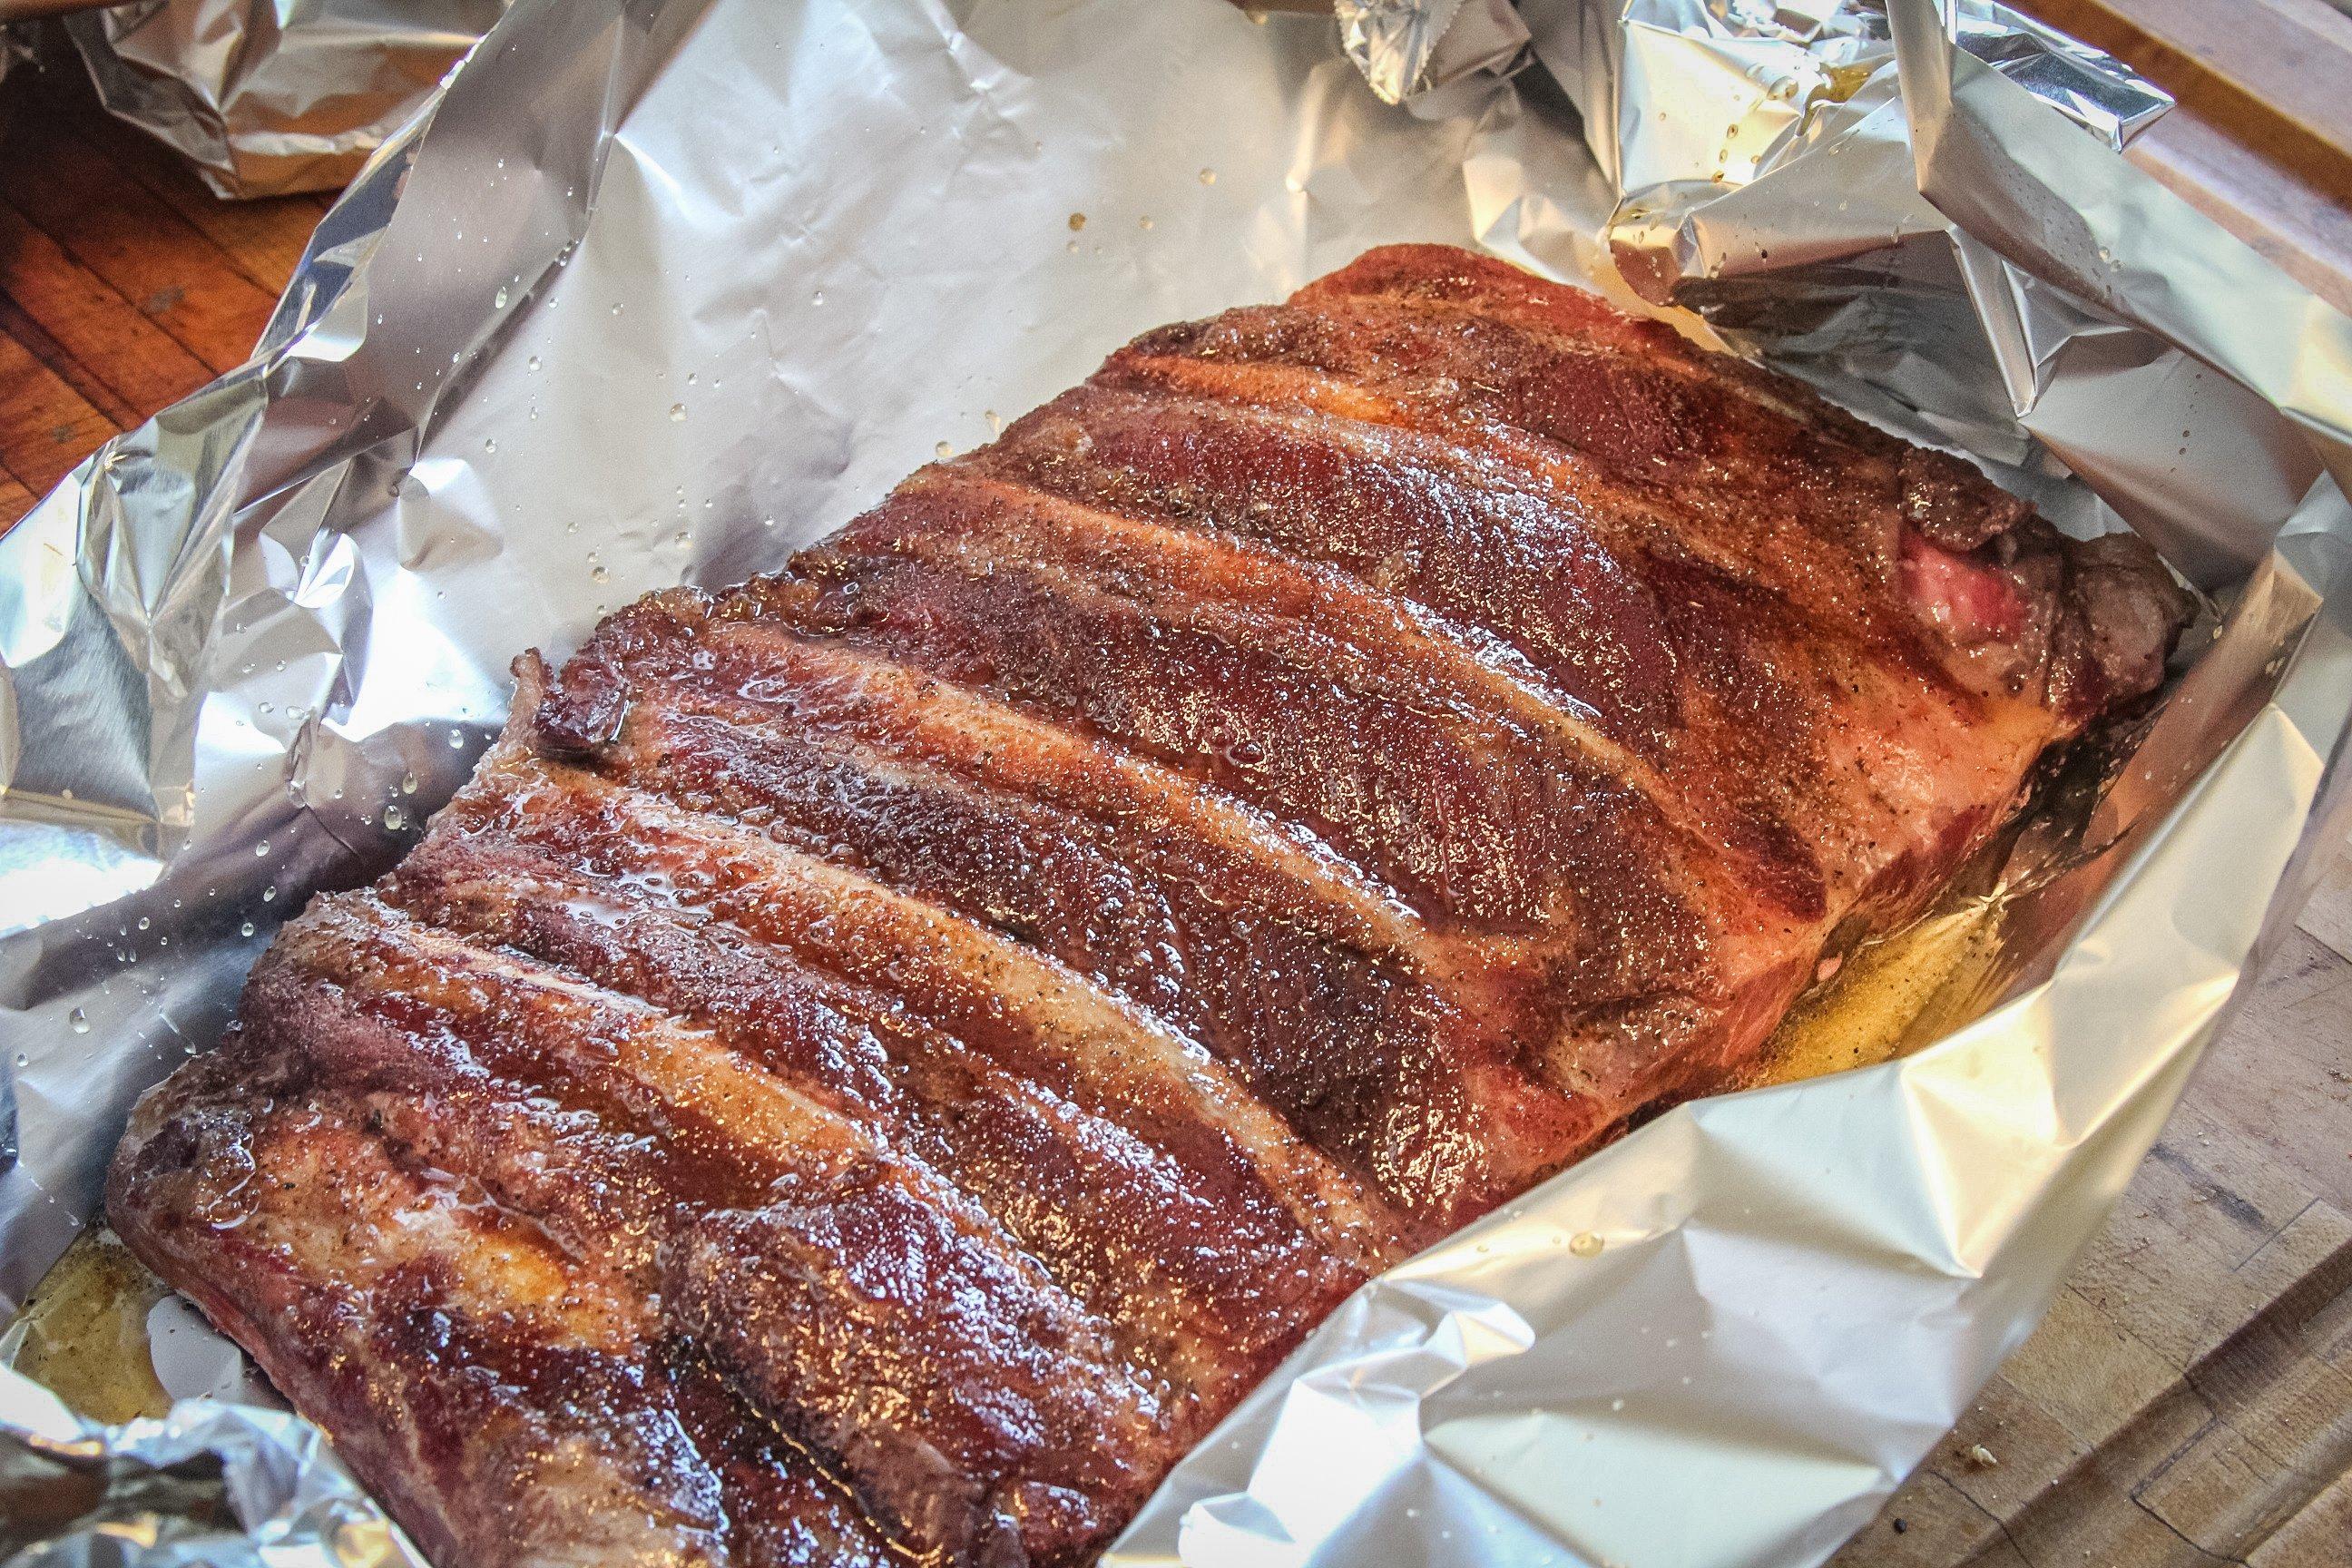 Drizzle the ribs with the glaze, then wrap tightly in foil and continue cooking.